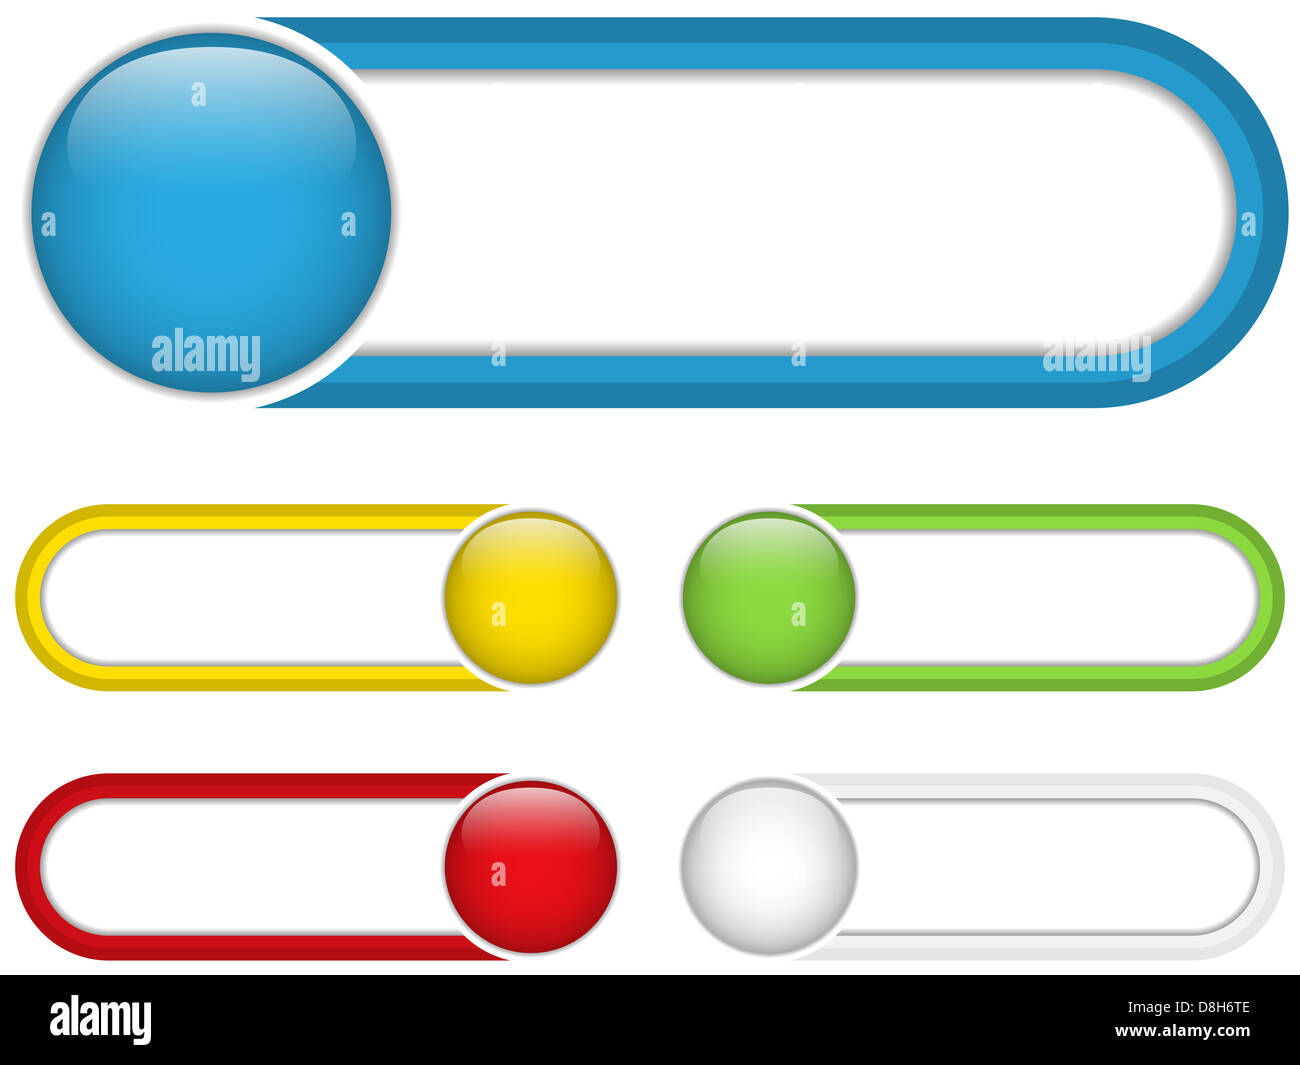 Glossy web buttons with colored bars. Editable Vector Illustration Stock Photo